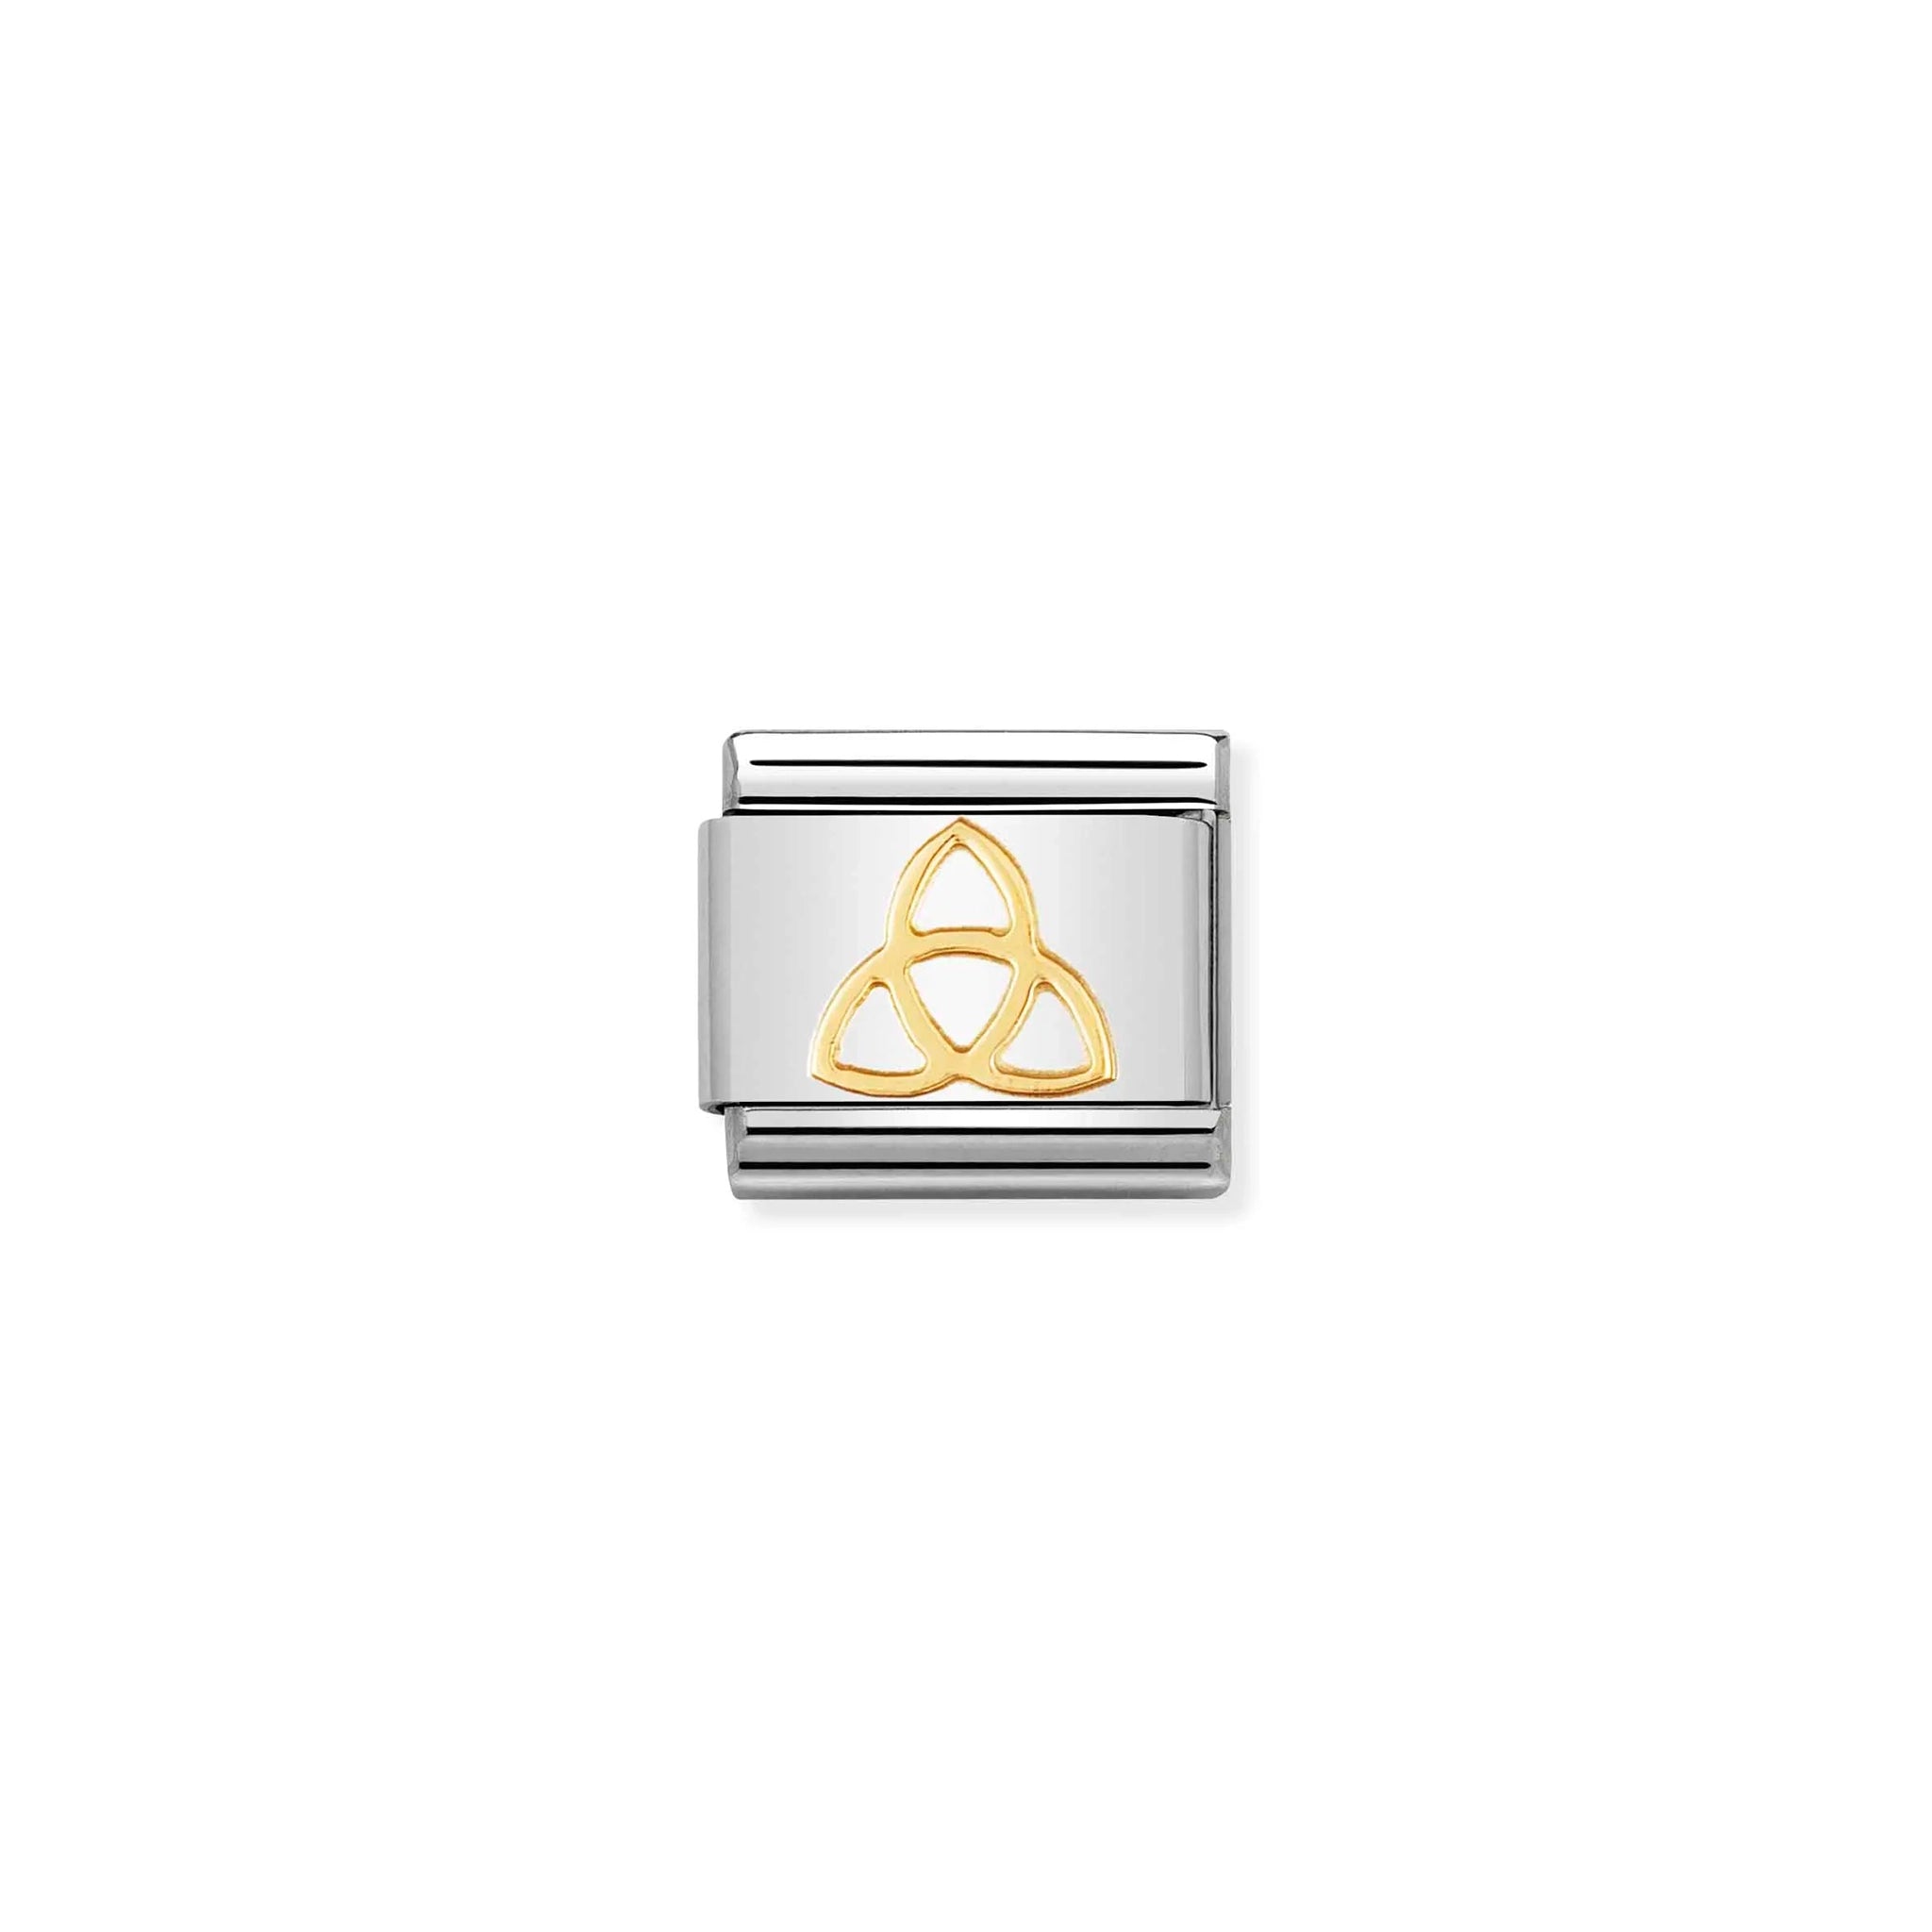 A Nomination charm link featuring a gold trinity knot design 